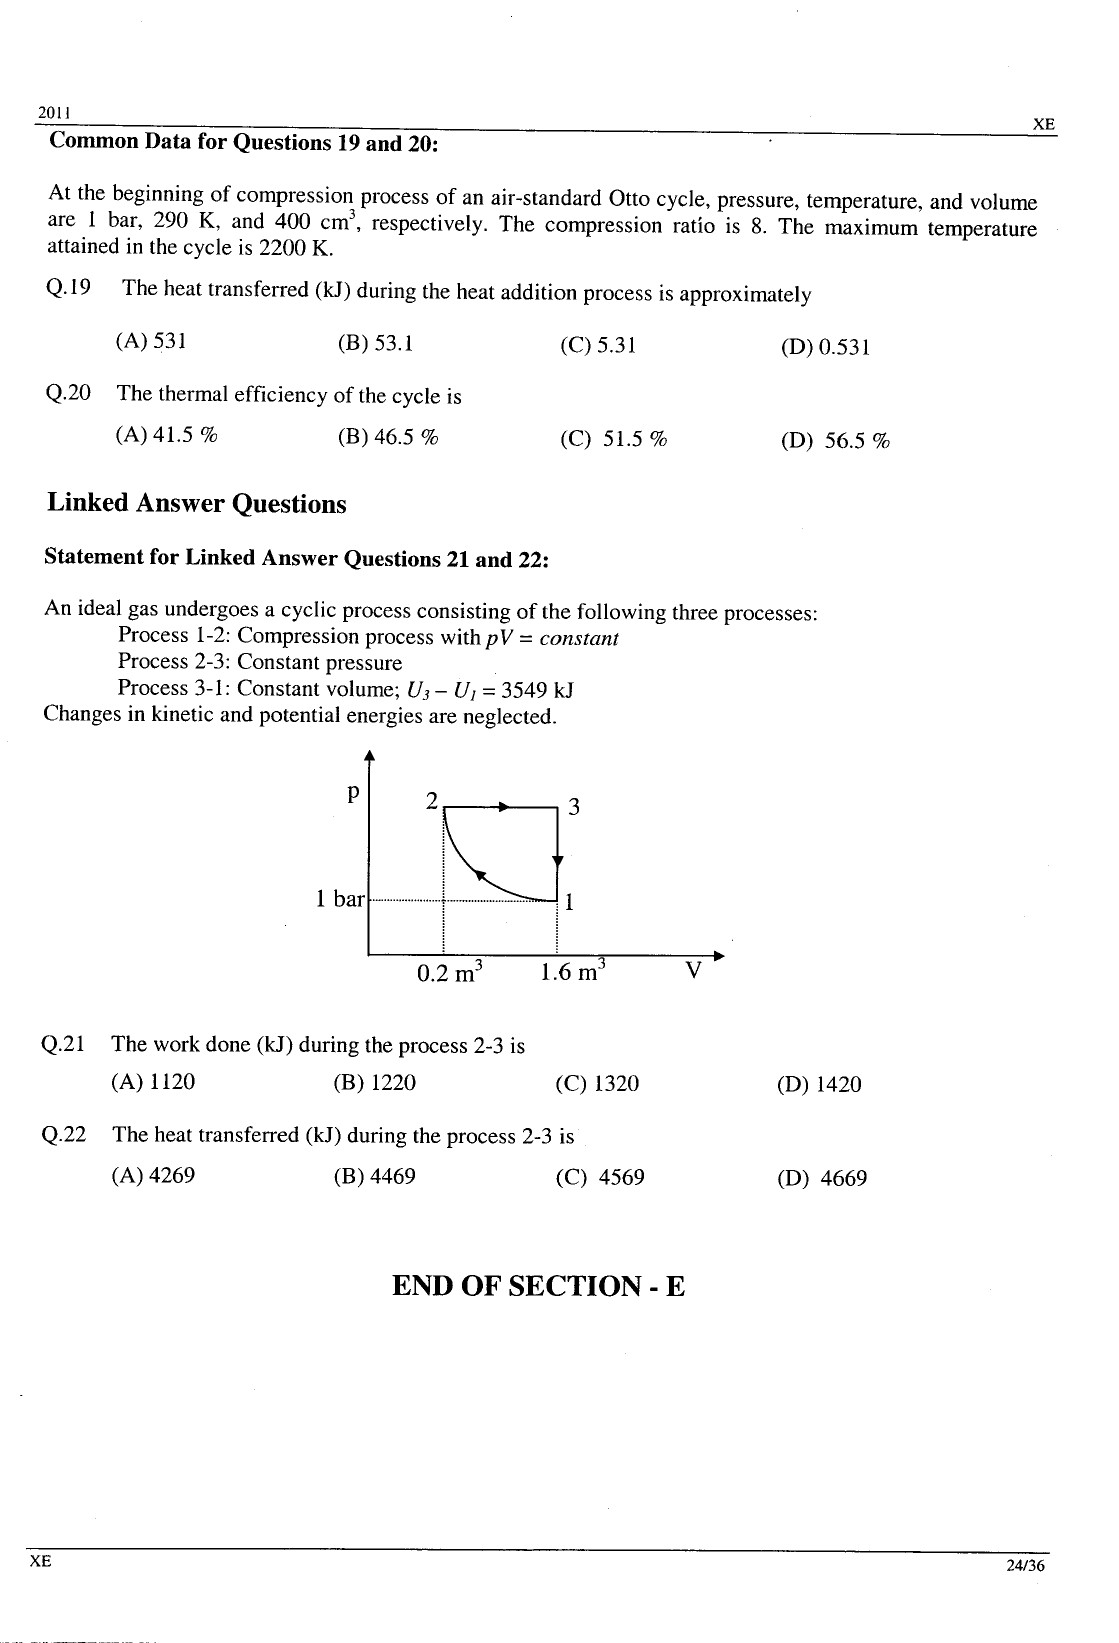 GATE Exam Question Paper 2011 Engineering Sciences 24